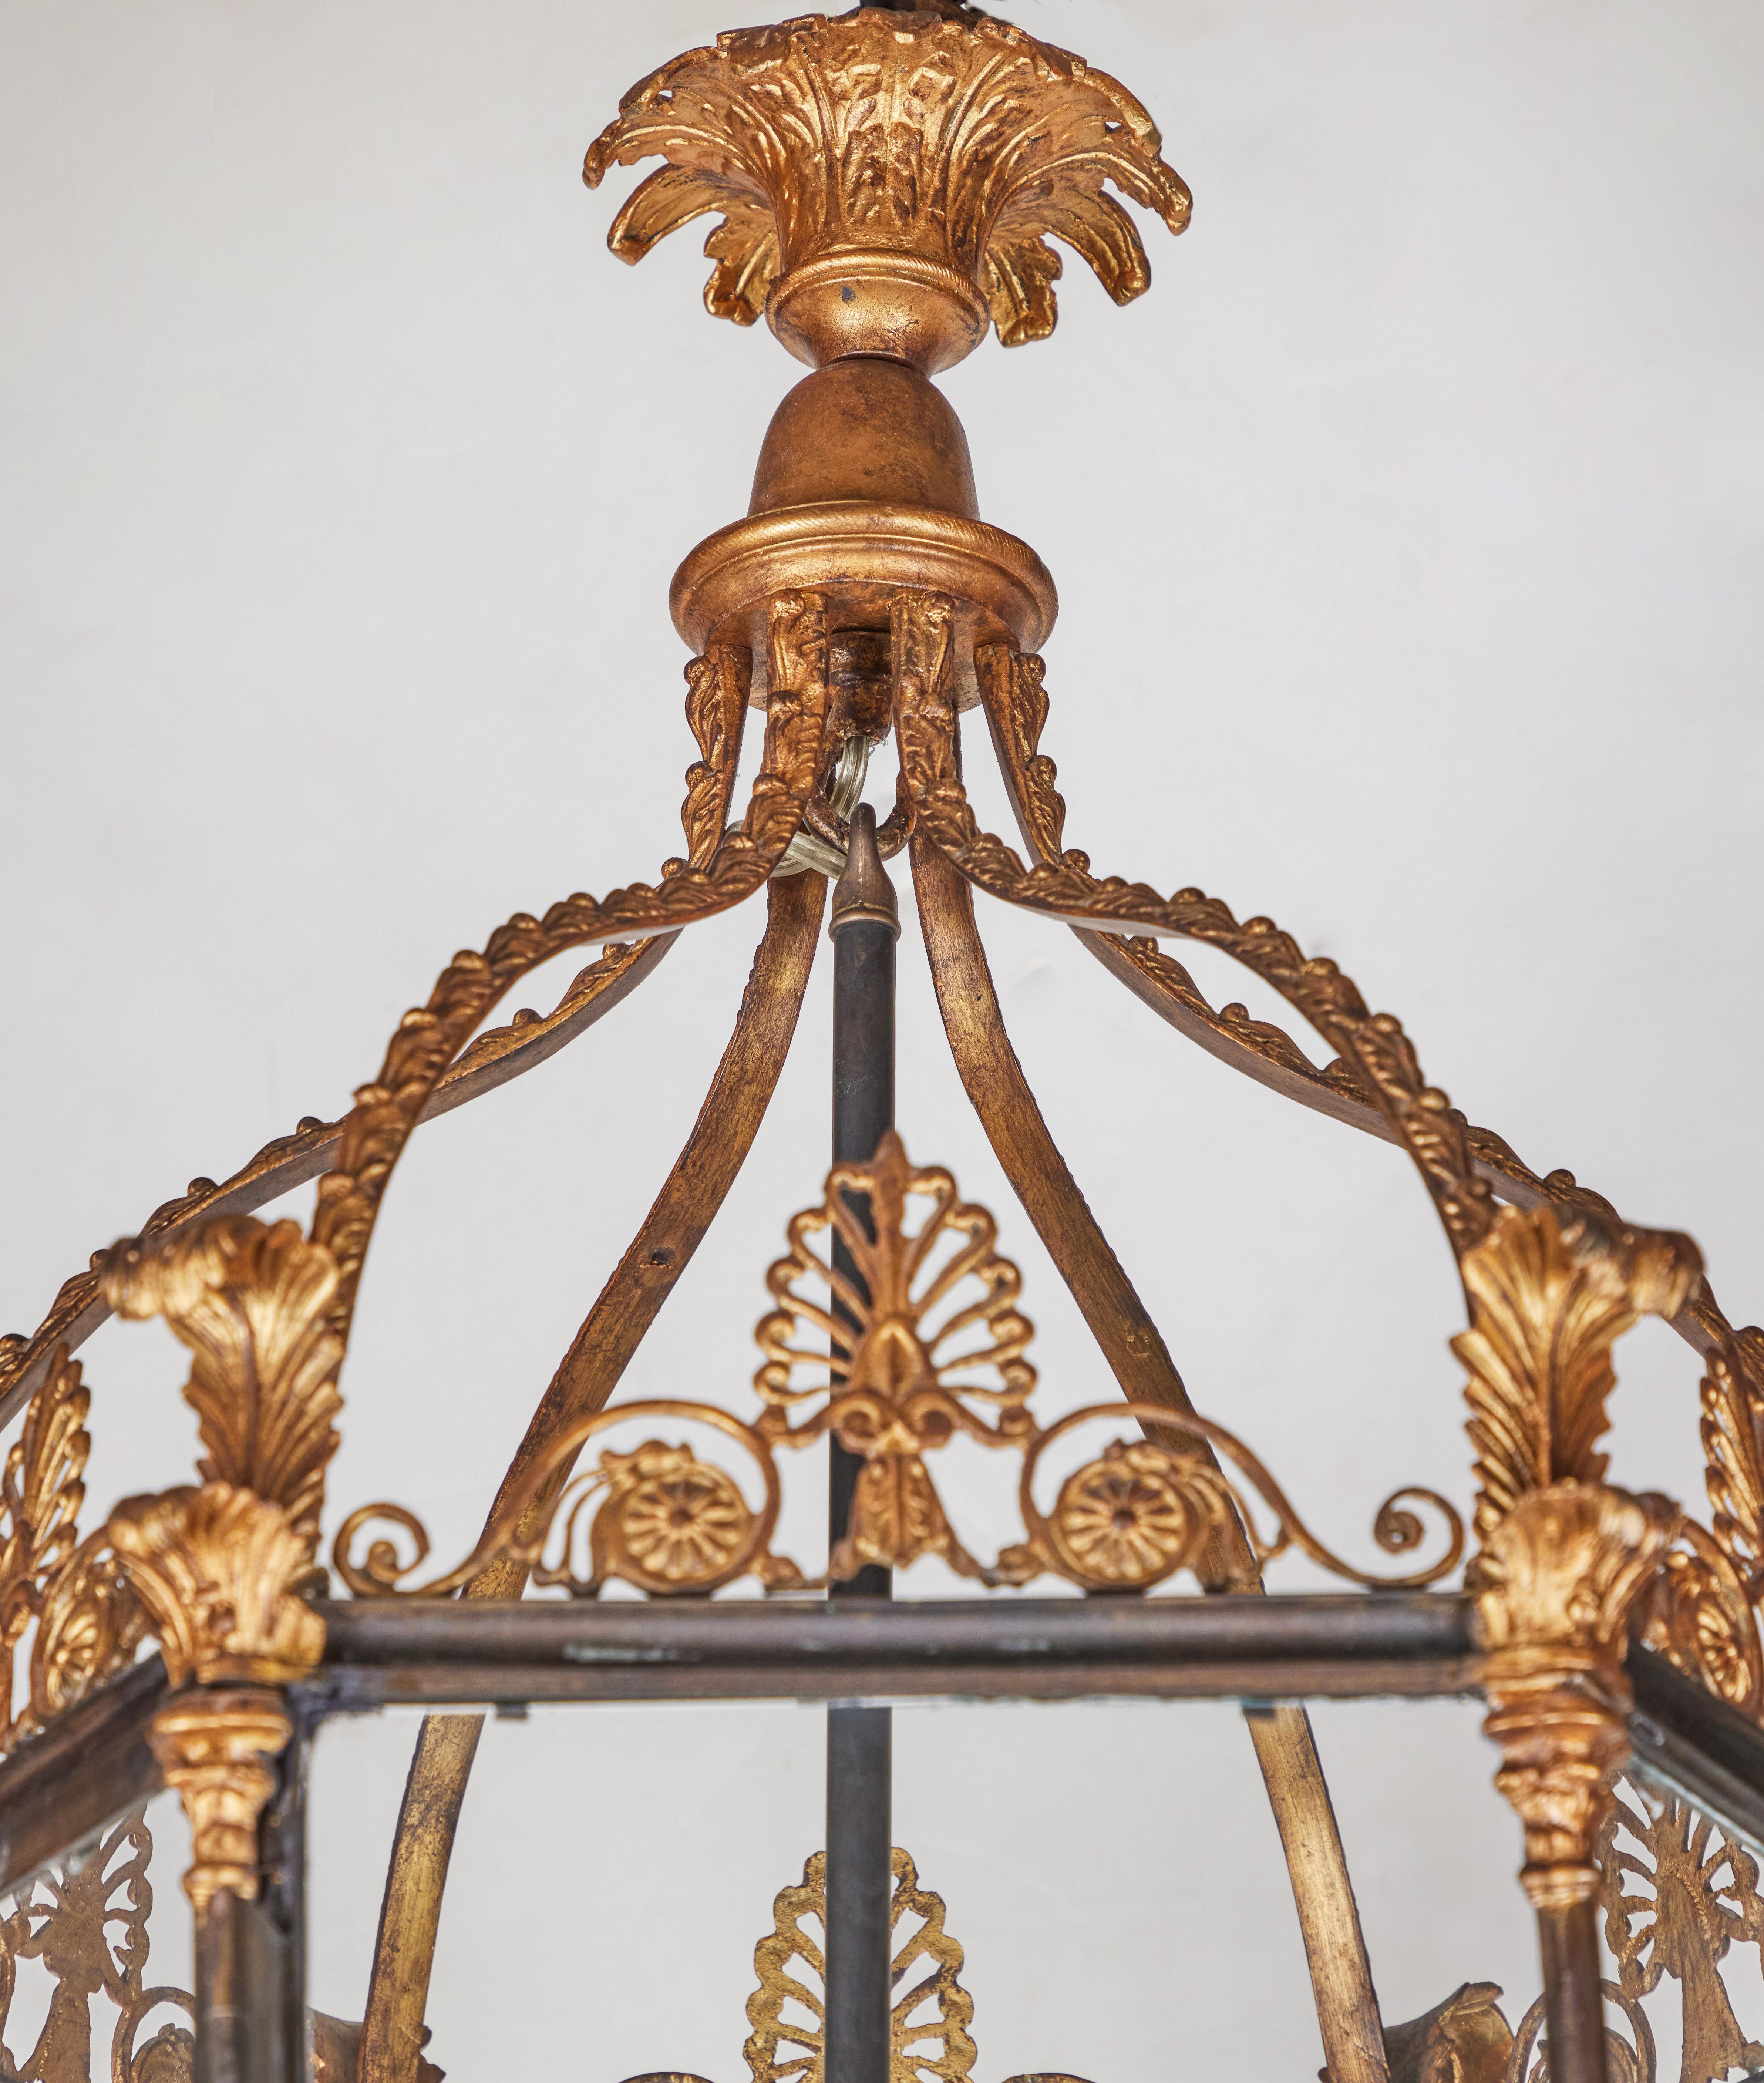 Hexagonal, cast iron and gilt bronze, glass encased, four-light lantern. The slender pillars comprising the body, rises to curling, gilt bronze leaves beneath a canopy featuring scrolling foliate forms all surmounted by a ceiling medallion of the